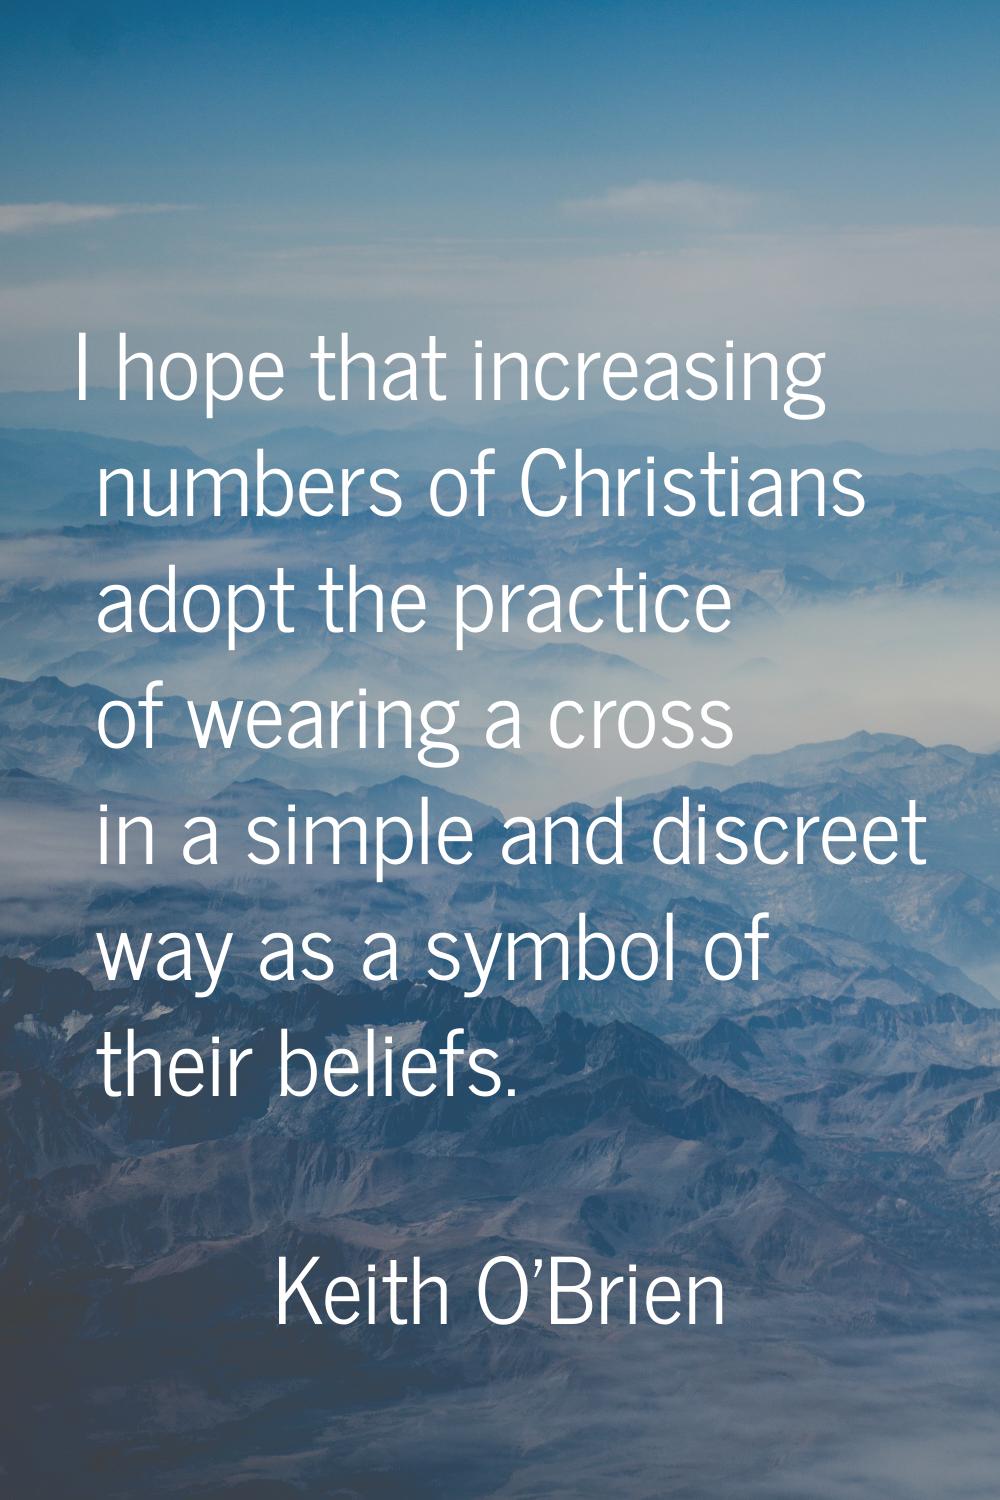 I hope that increasing numbers of Christians adopt the practice of wearing a cross in a simple and 